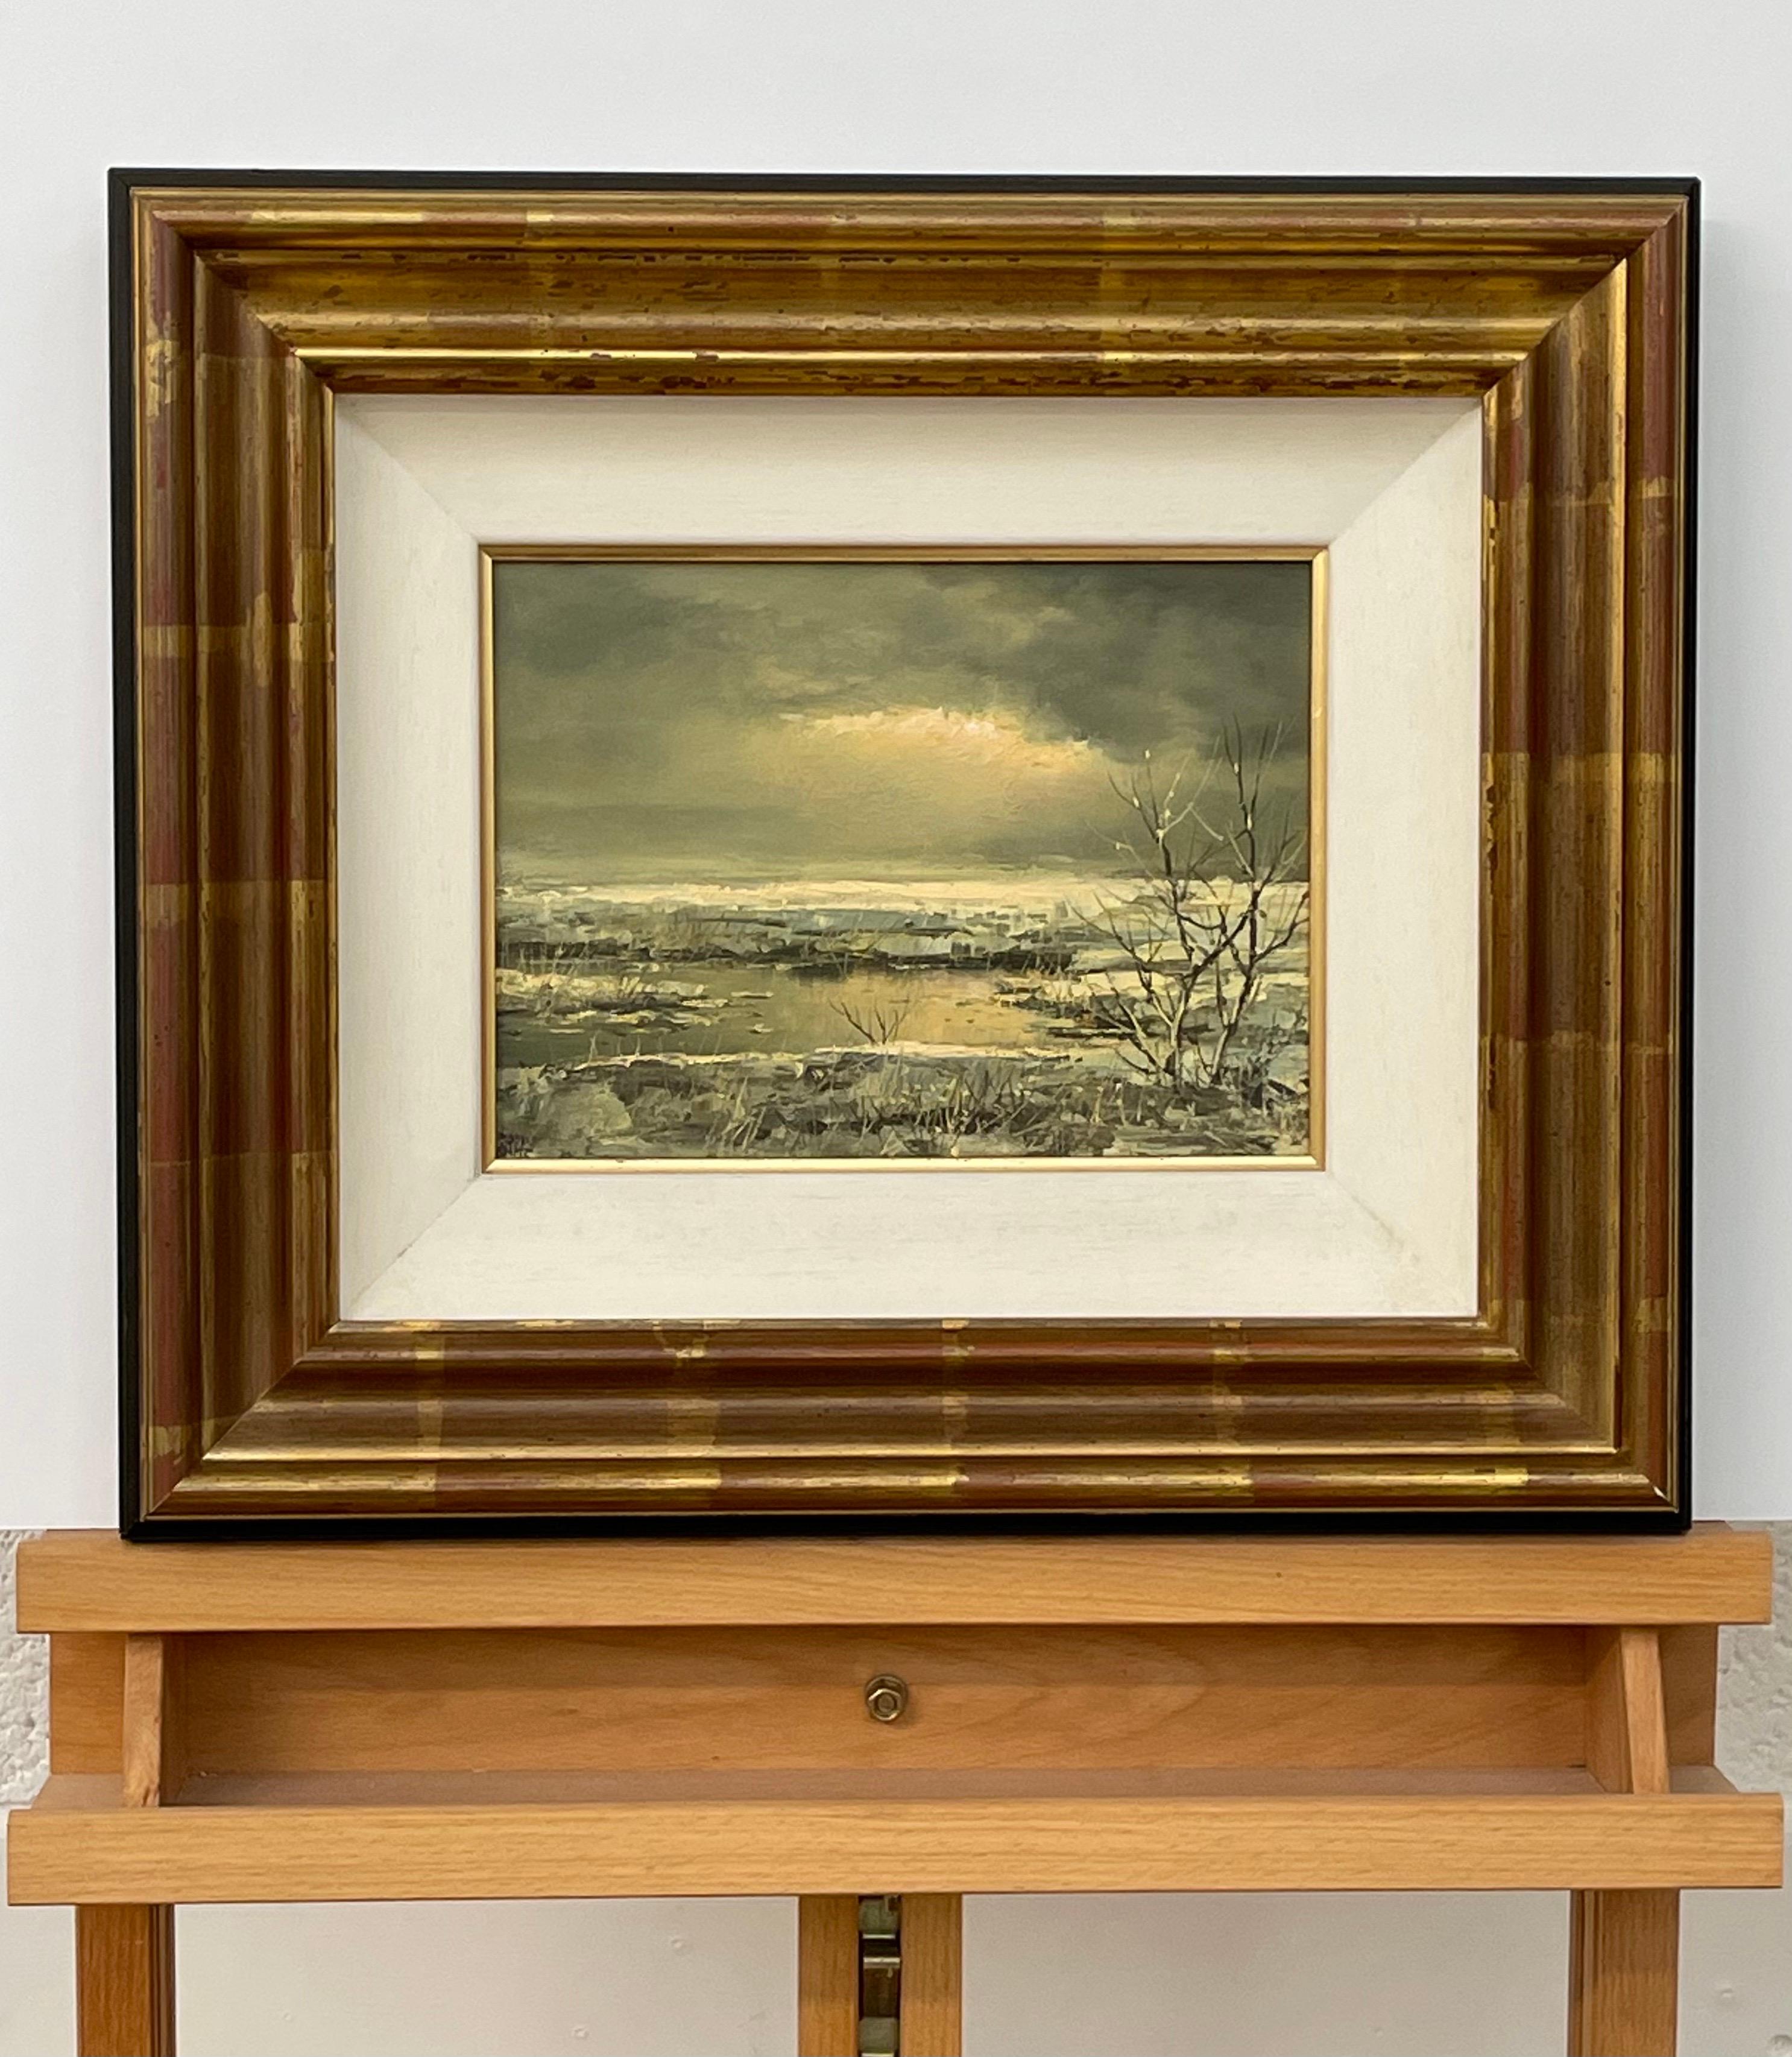 Small Oil Painting of Winter Landscape by 20th Century Dutch Artist Joop Smits (1938-2014) 

Art measures 9 x 7 inches
Frame measures 16 x 14 inches

Artist Joop Smits was born in the Netherlands in the city of Eindhoven and was educated at the Art